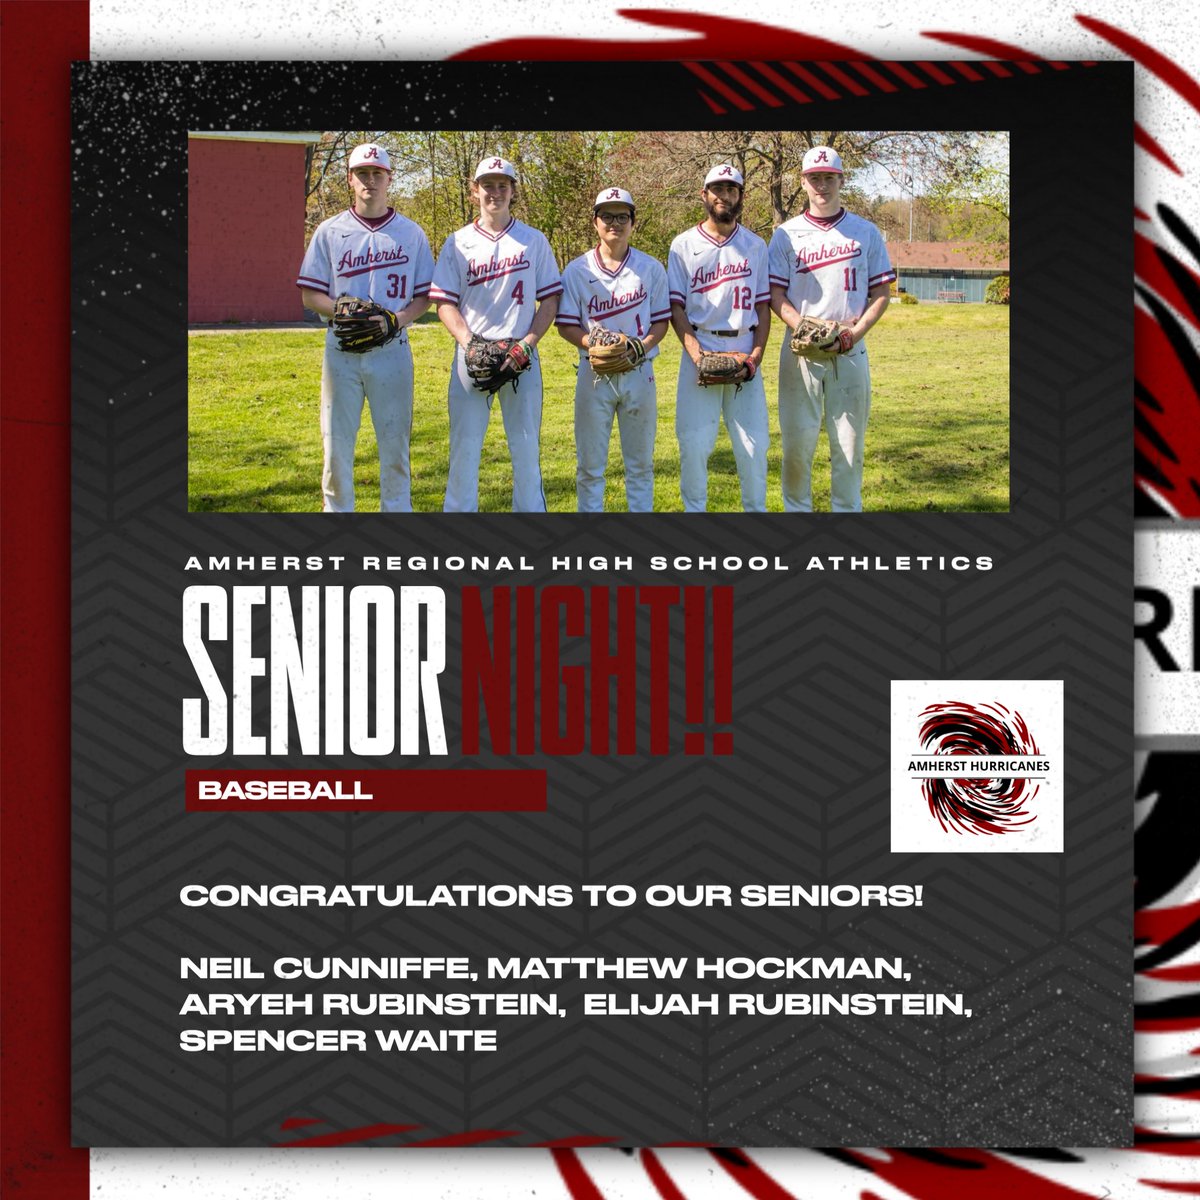 It's Senior Night for the Baseball team! Come out and support the team at 7:00PM! #Classof2024